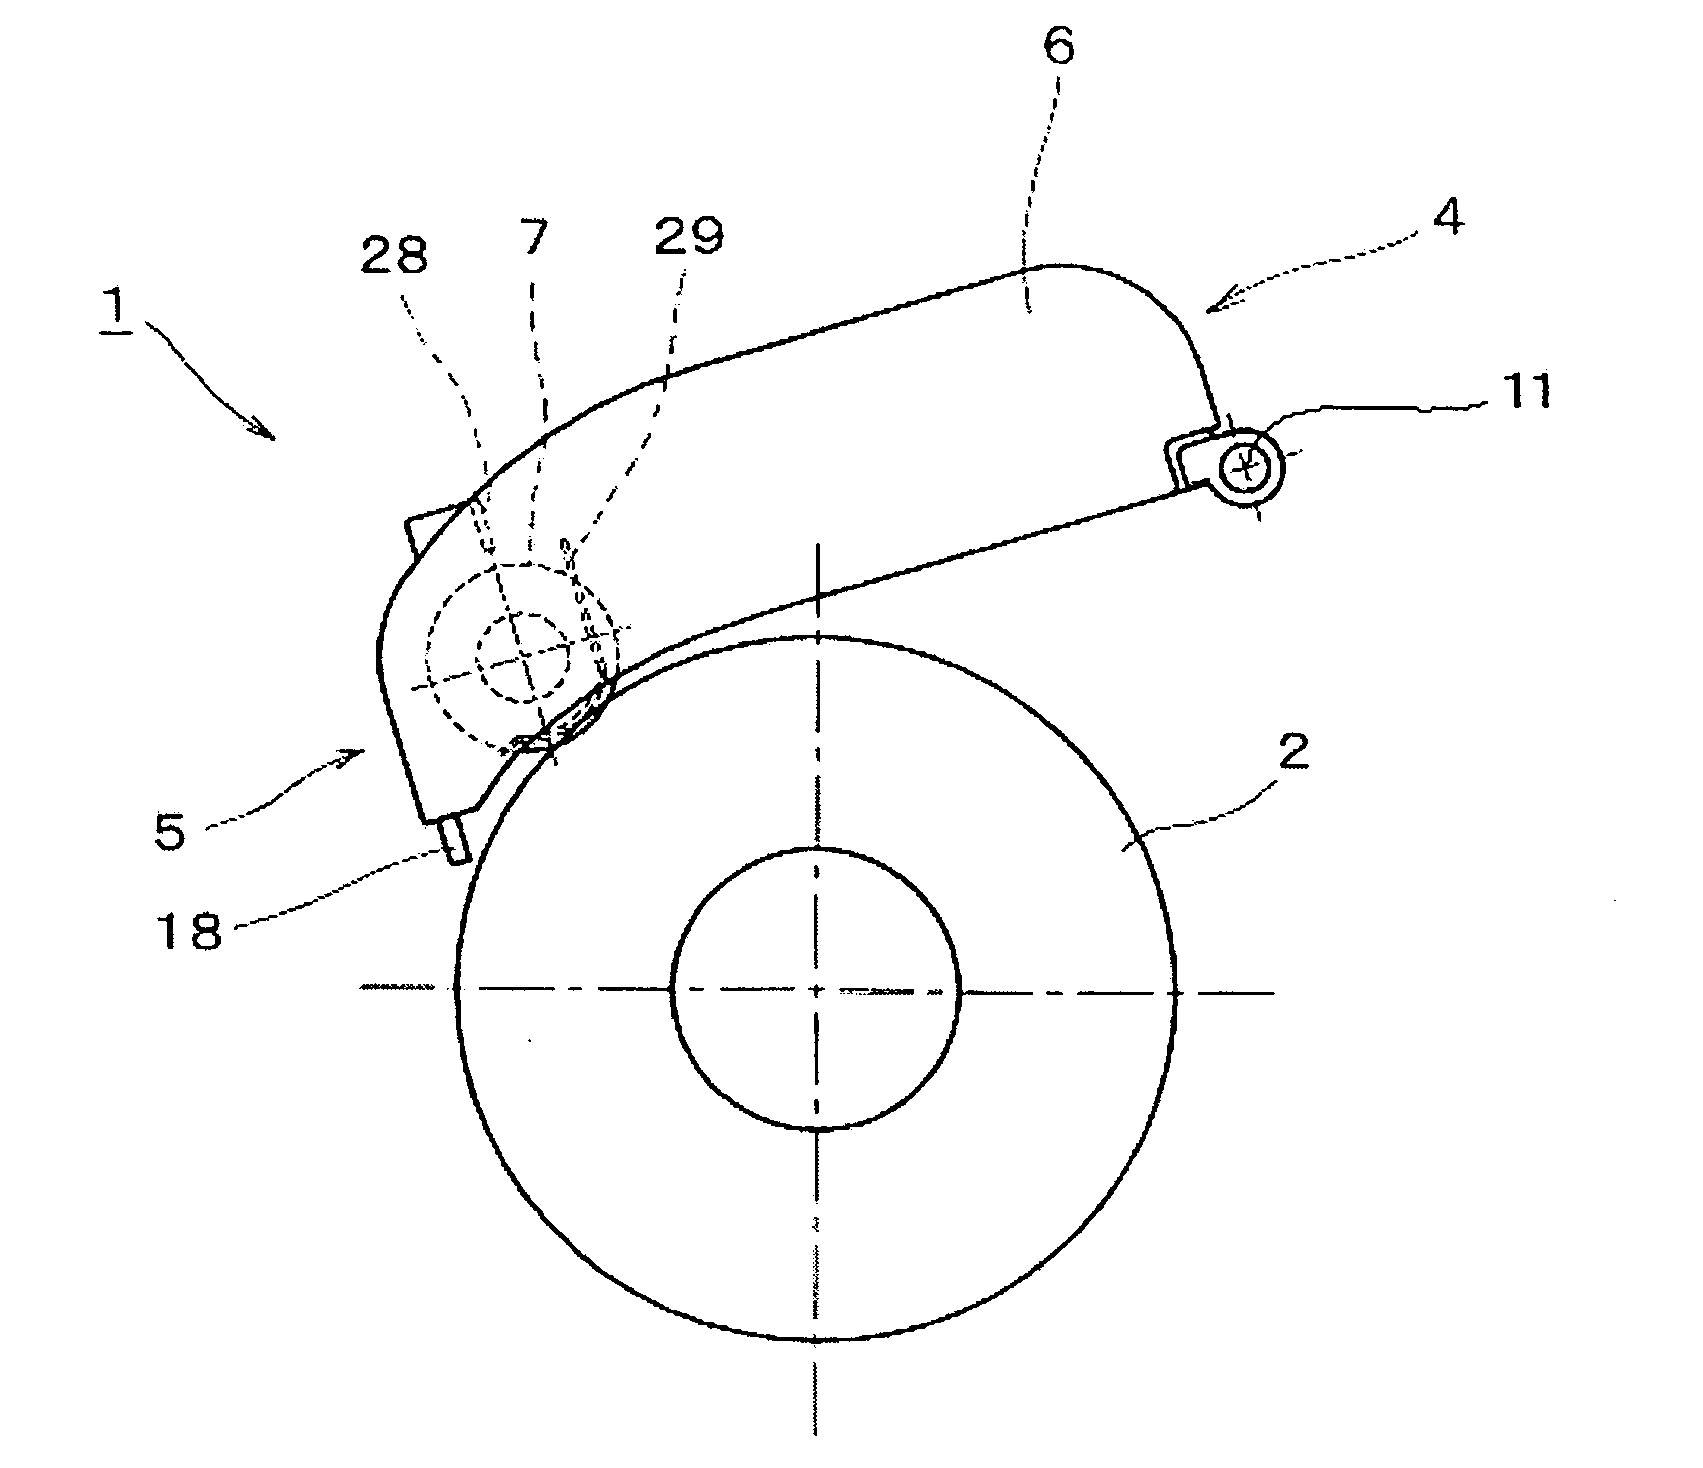 Rolled paper feeding device